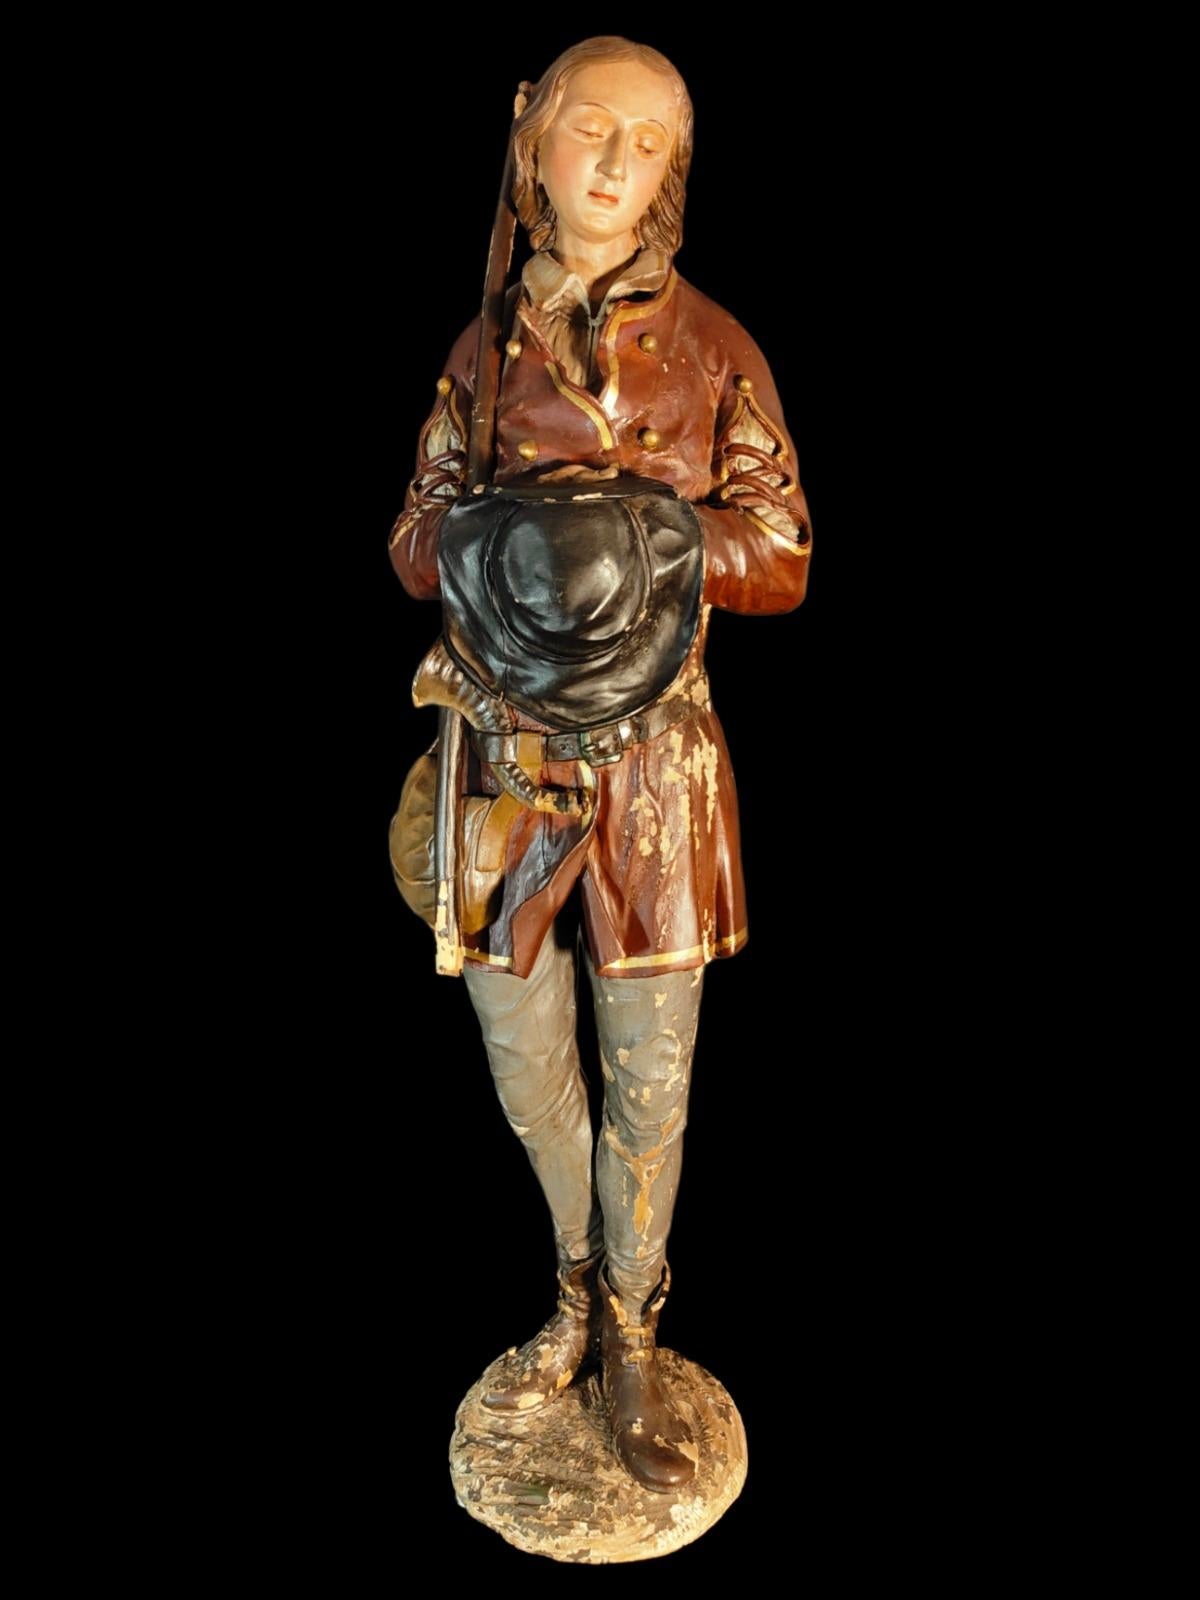 Large 18th century German sculpture solid wooden sculpture representing a shepherd. German work from the 18th century. Measure: height 114cm.
Good condition.